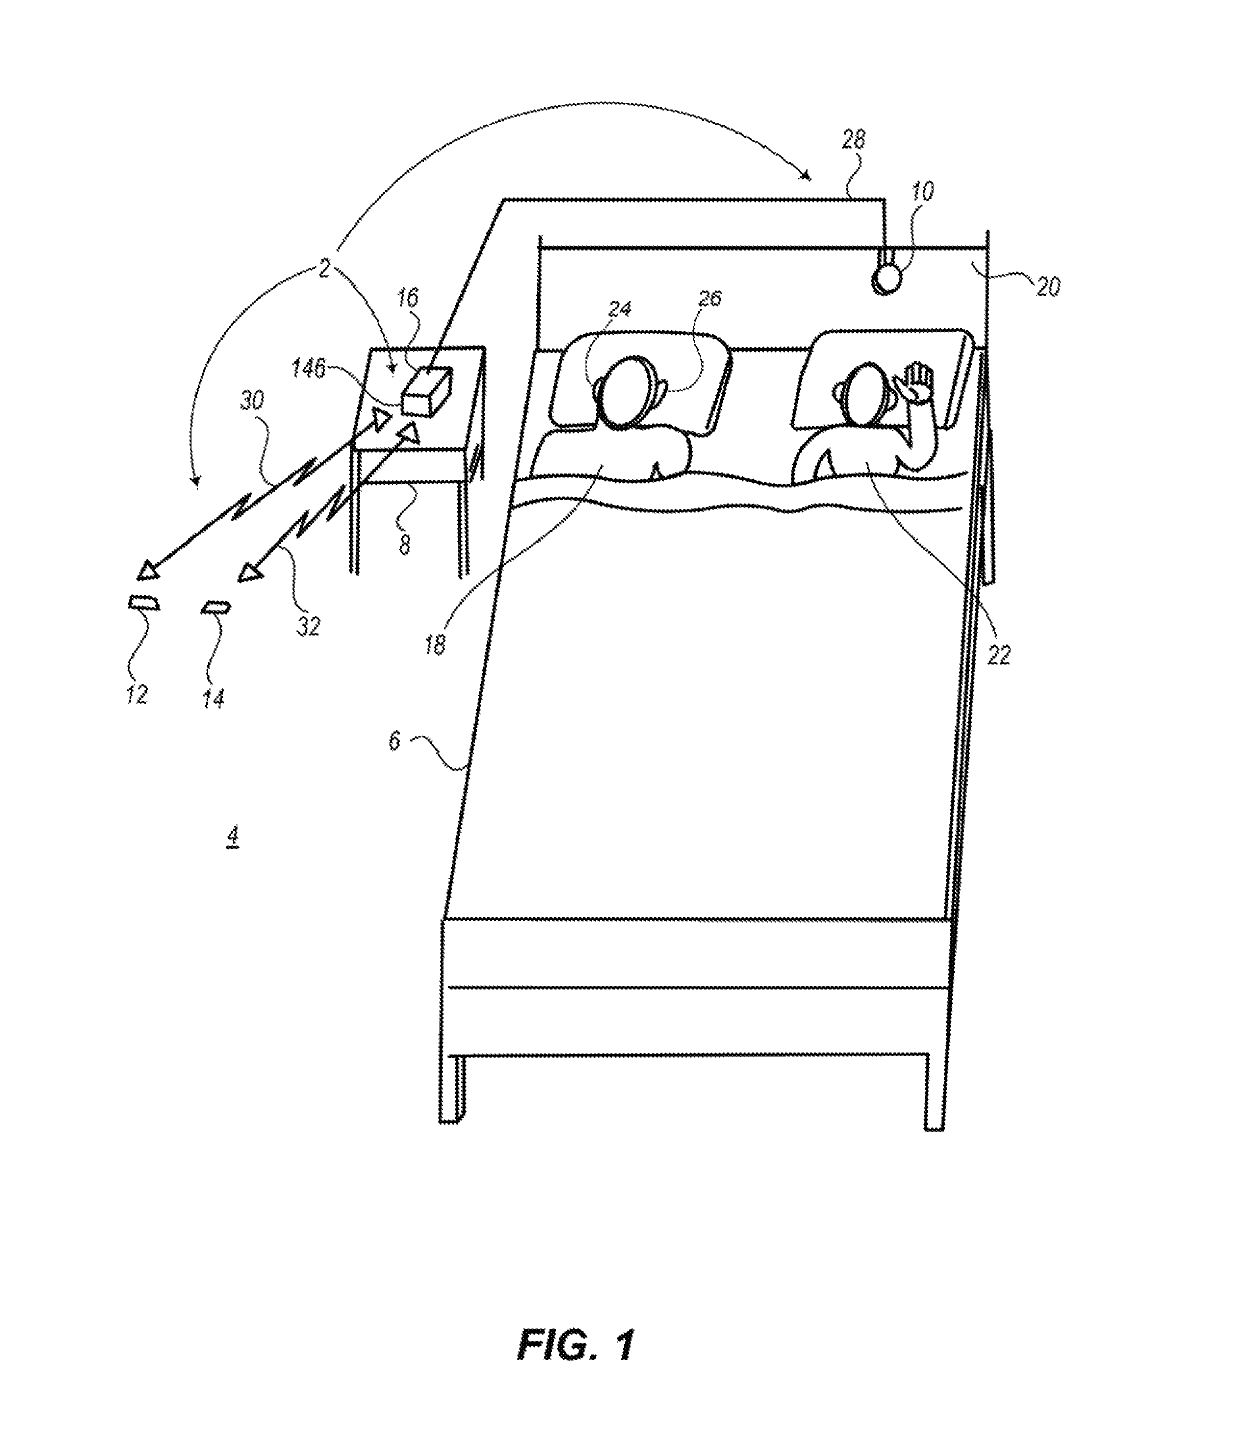 Snoring active noise-cancellation, masking, and suppression